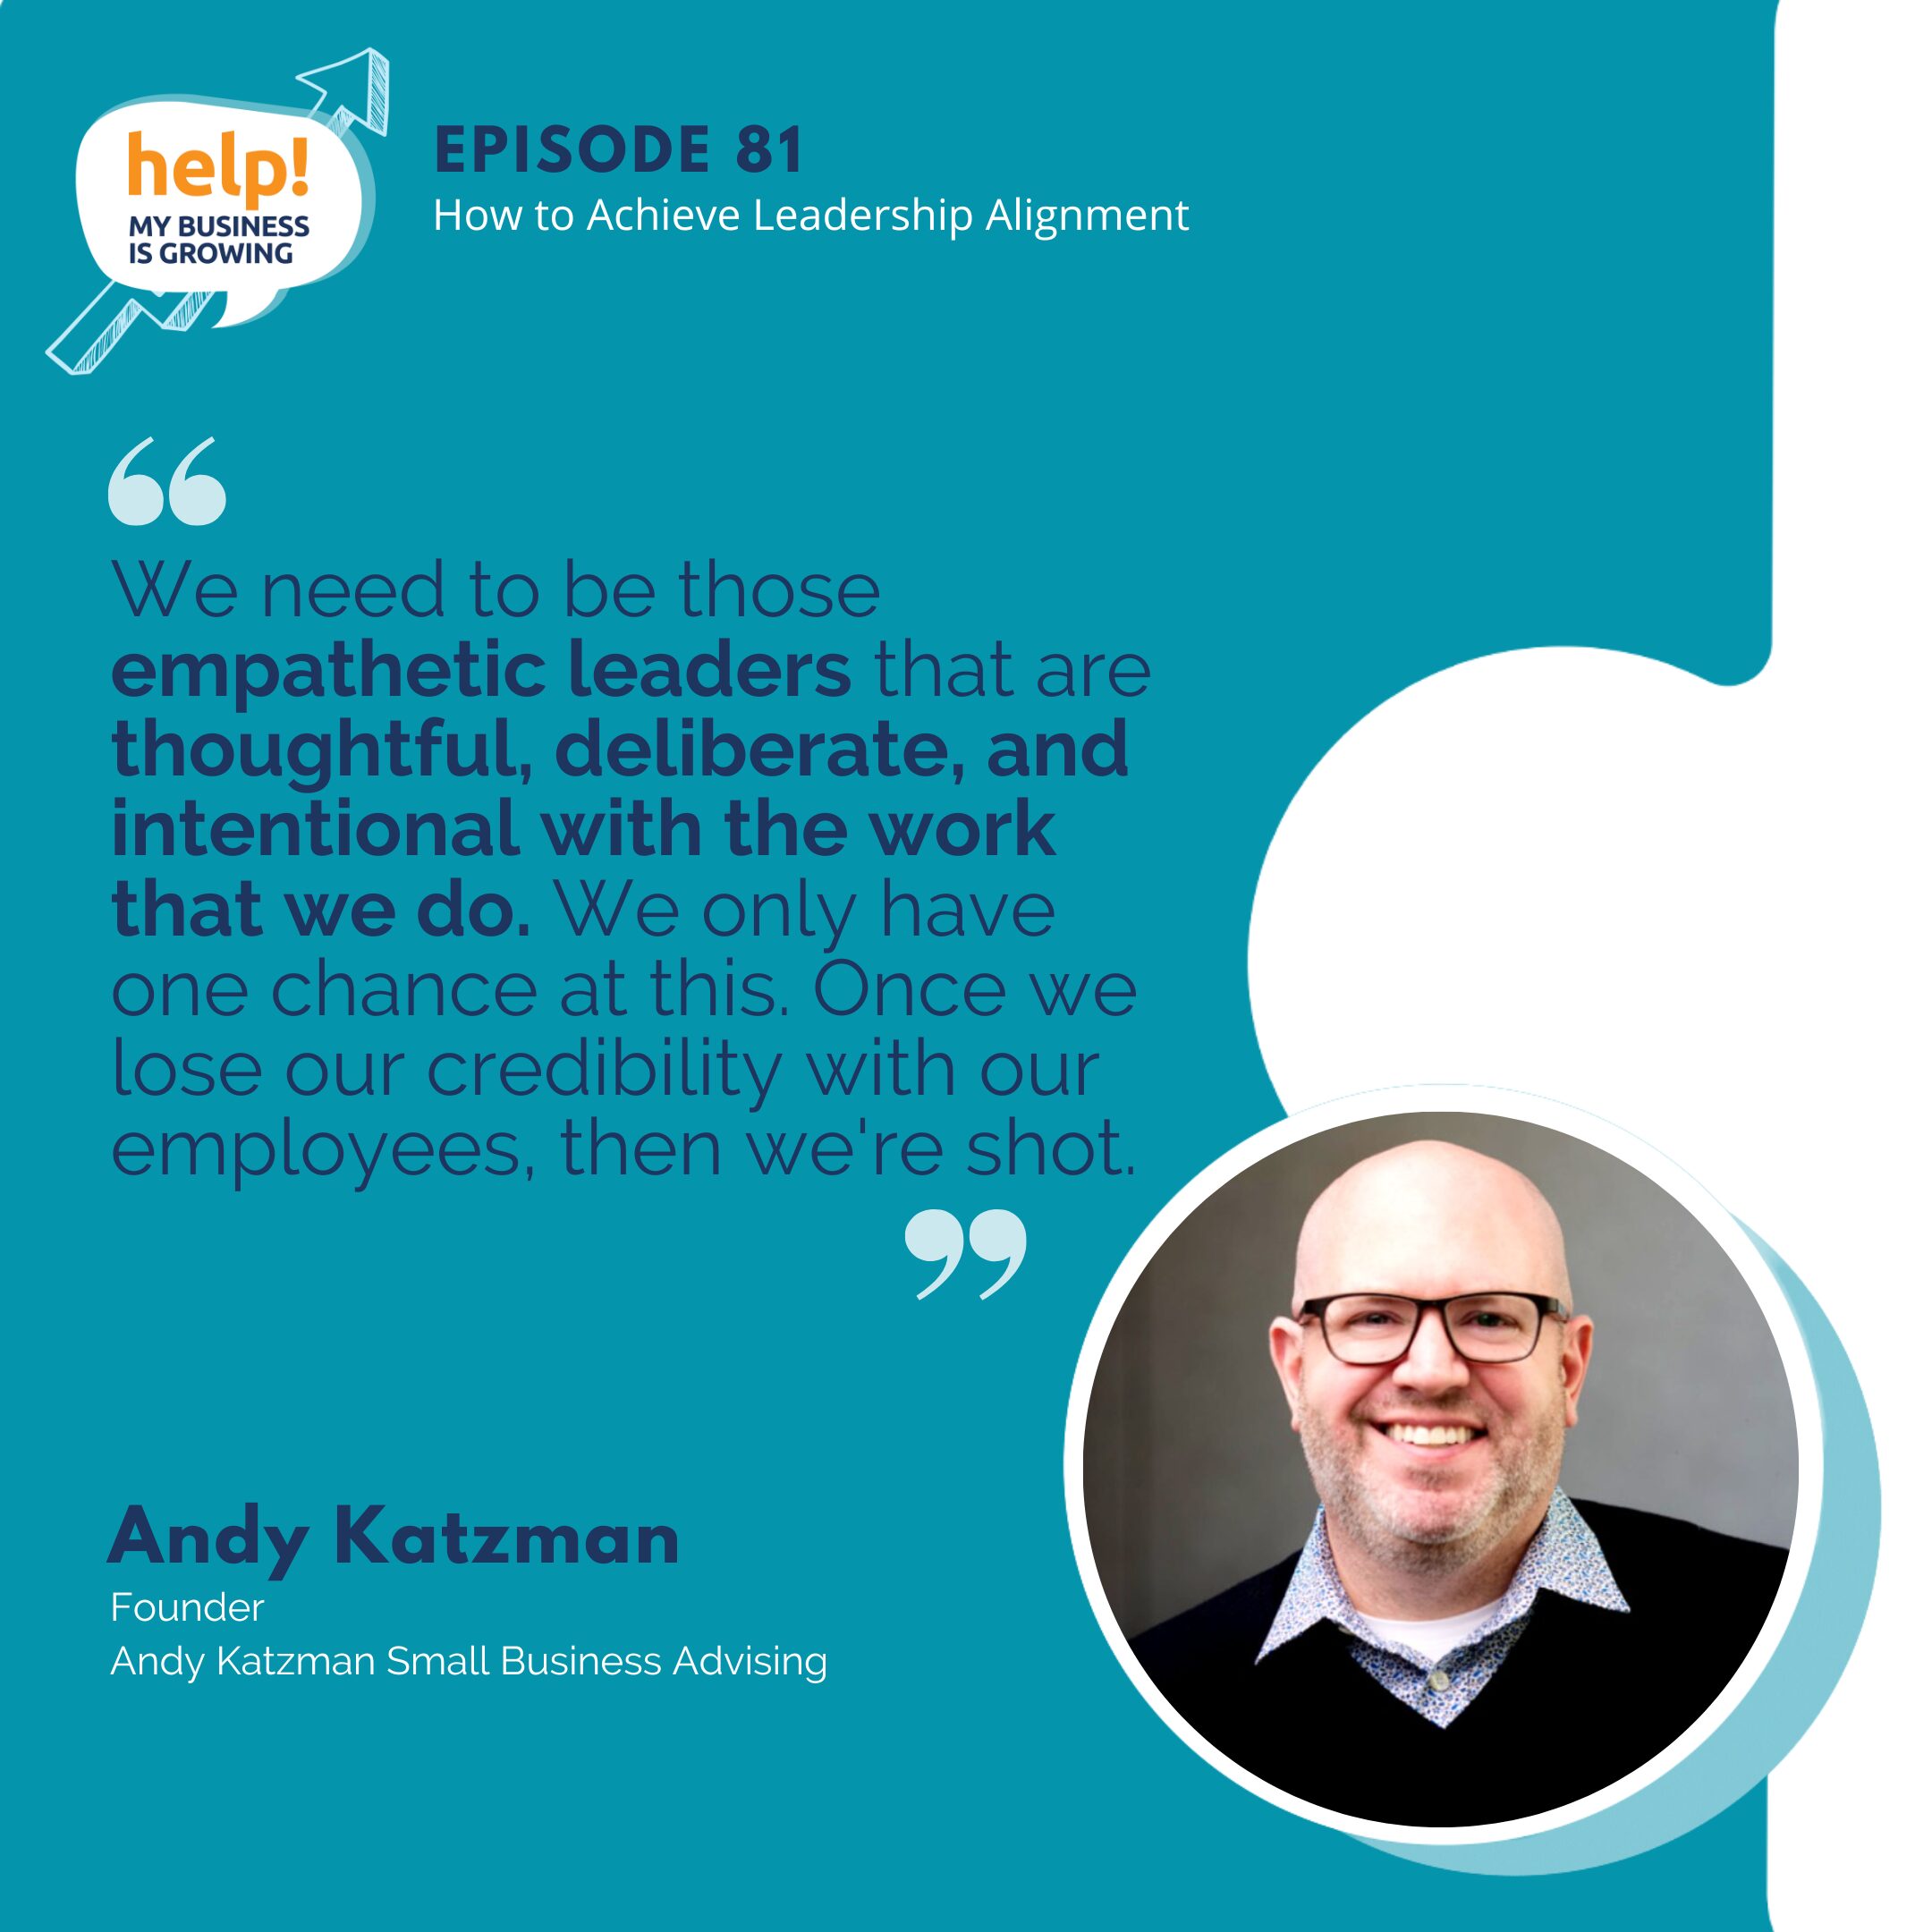 We need to be those empathetic leaders that are thoughtful, deliberate, and intentional with the work that we do. We only have one chance at this. Once we lose our credibility with our employees, then we're shot.